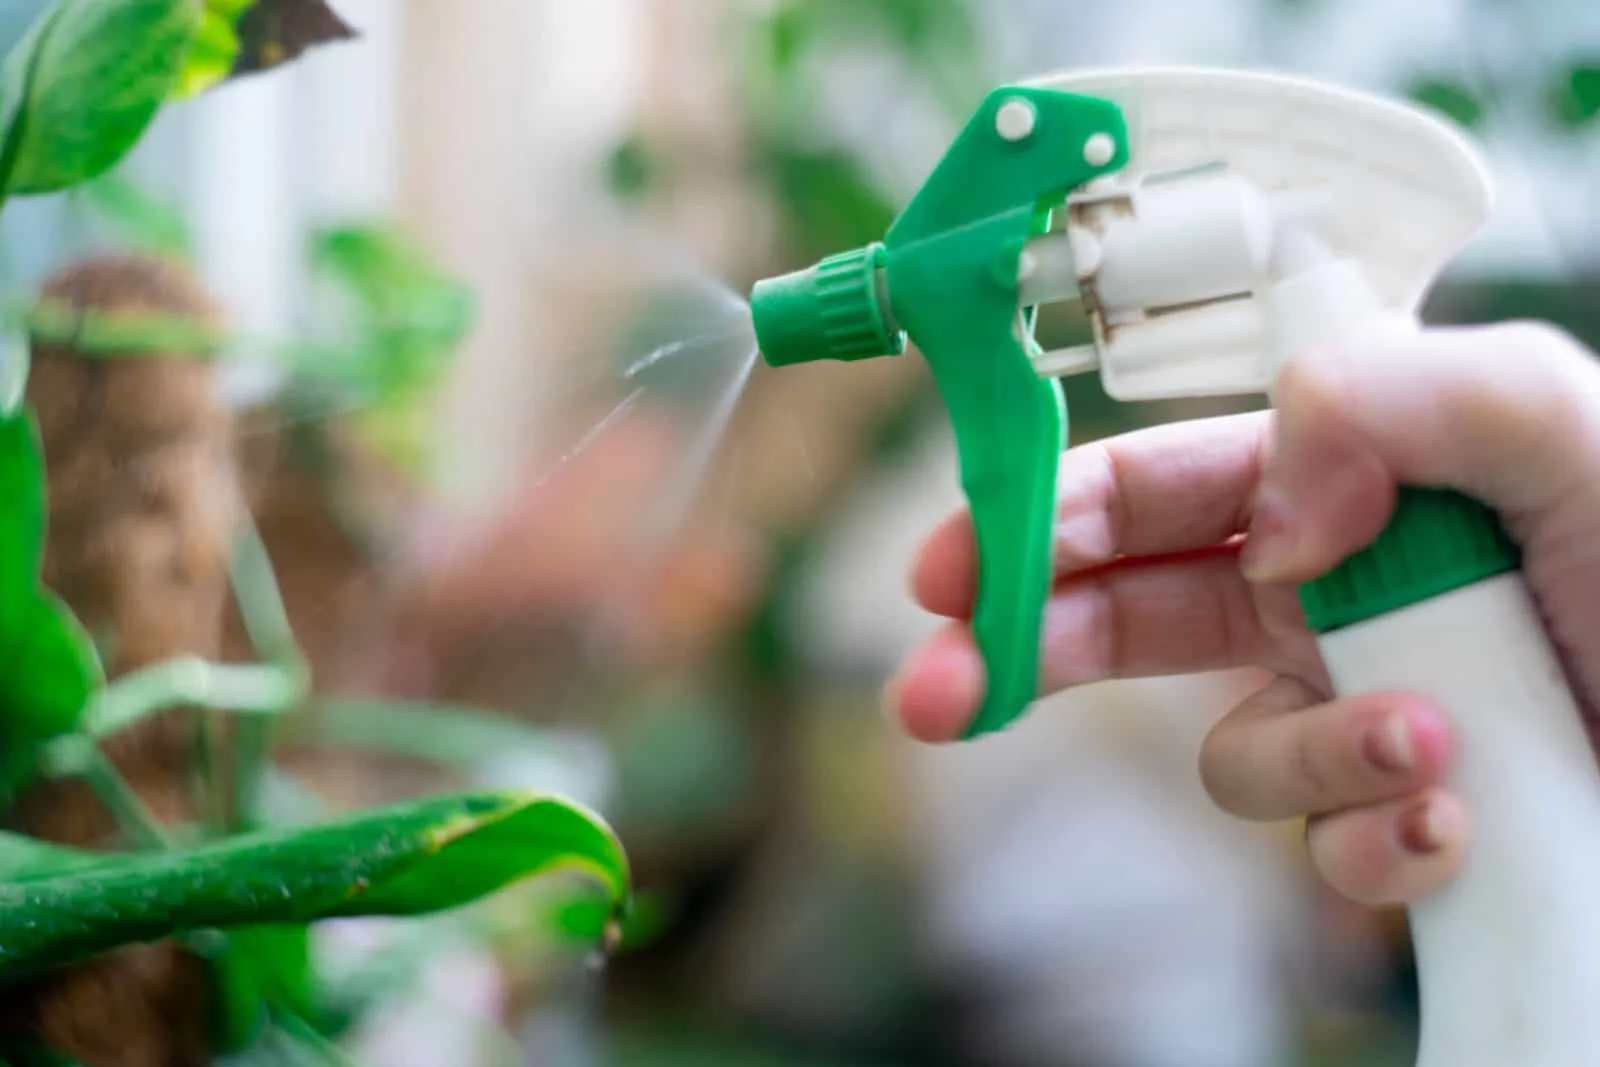 Green spray bottle being used to mist spray pesticide